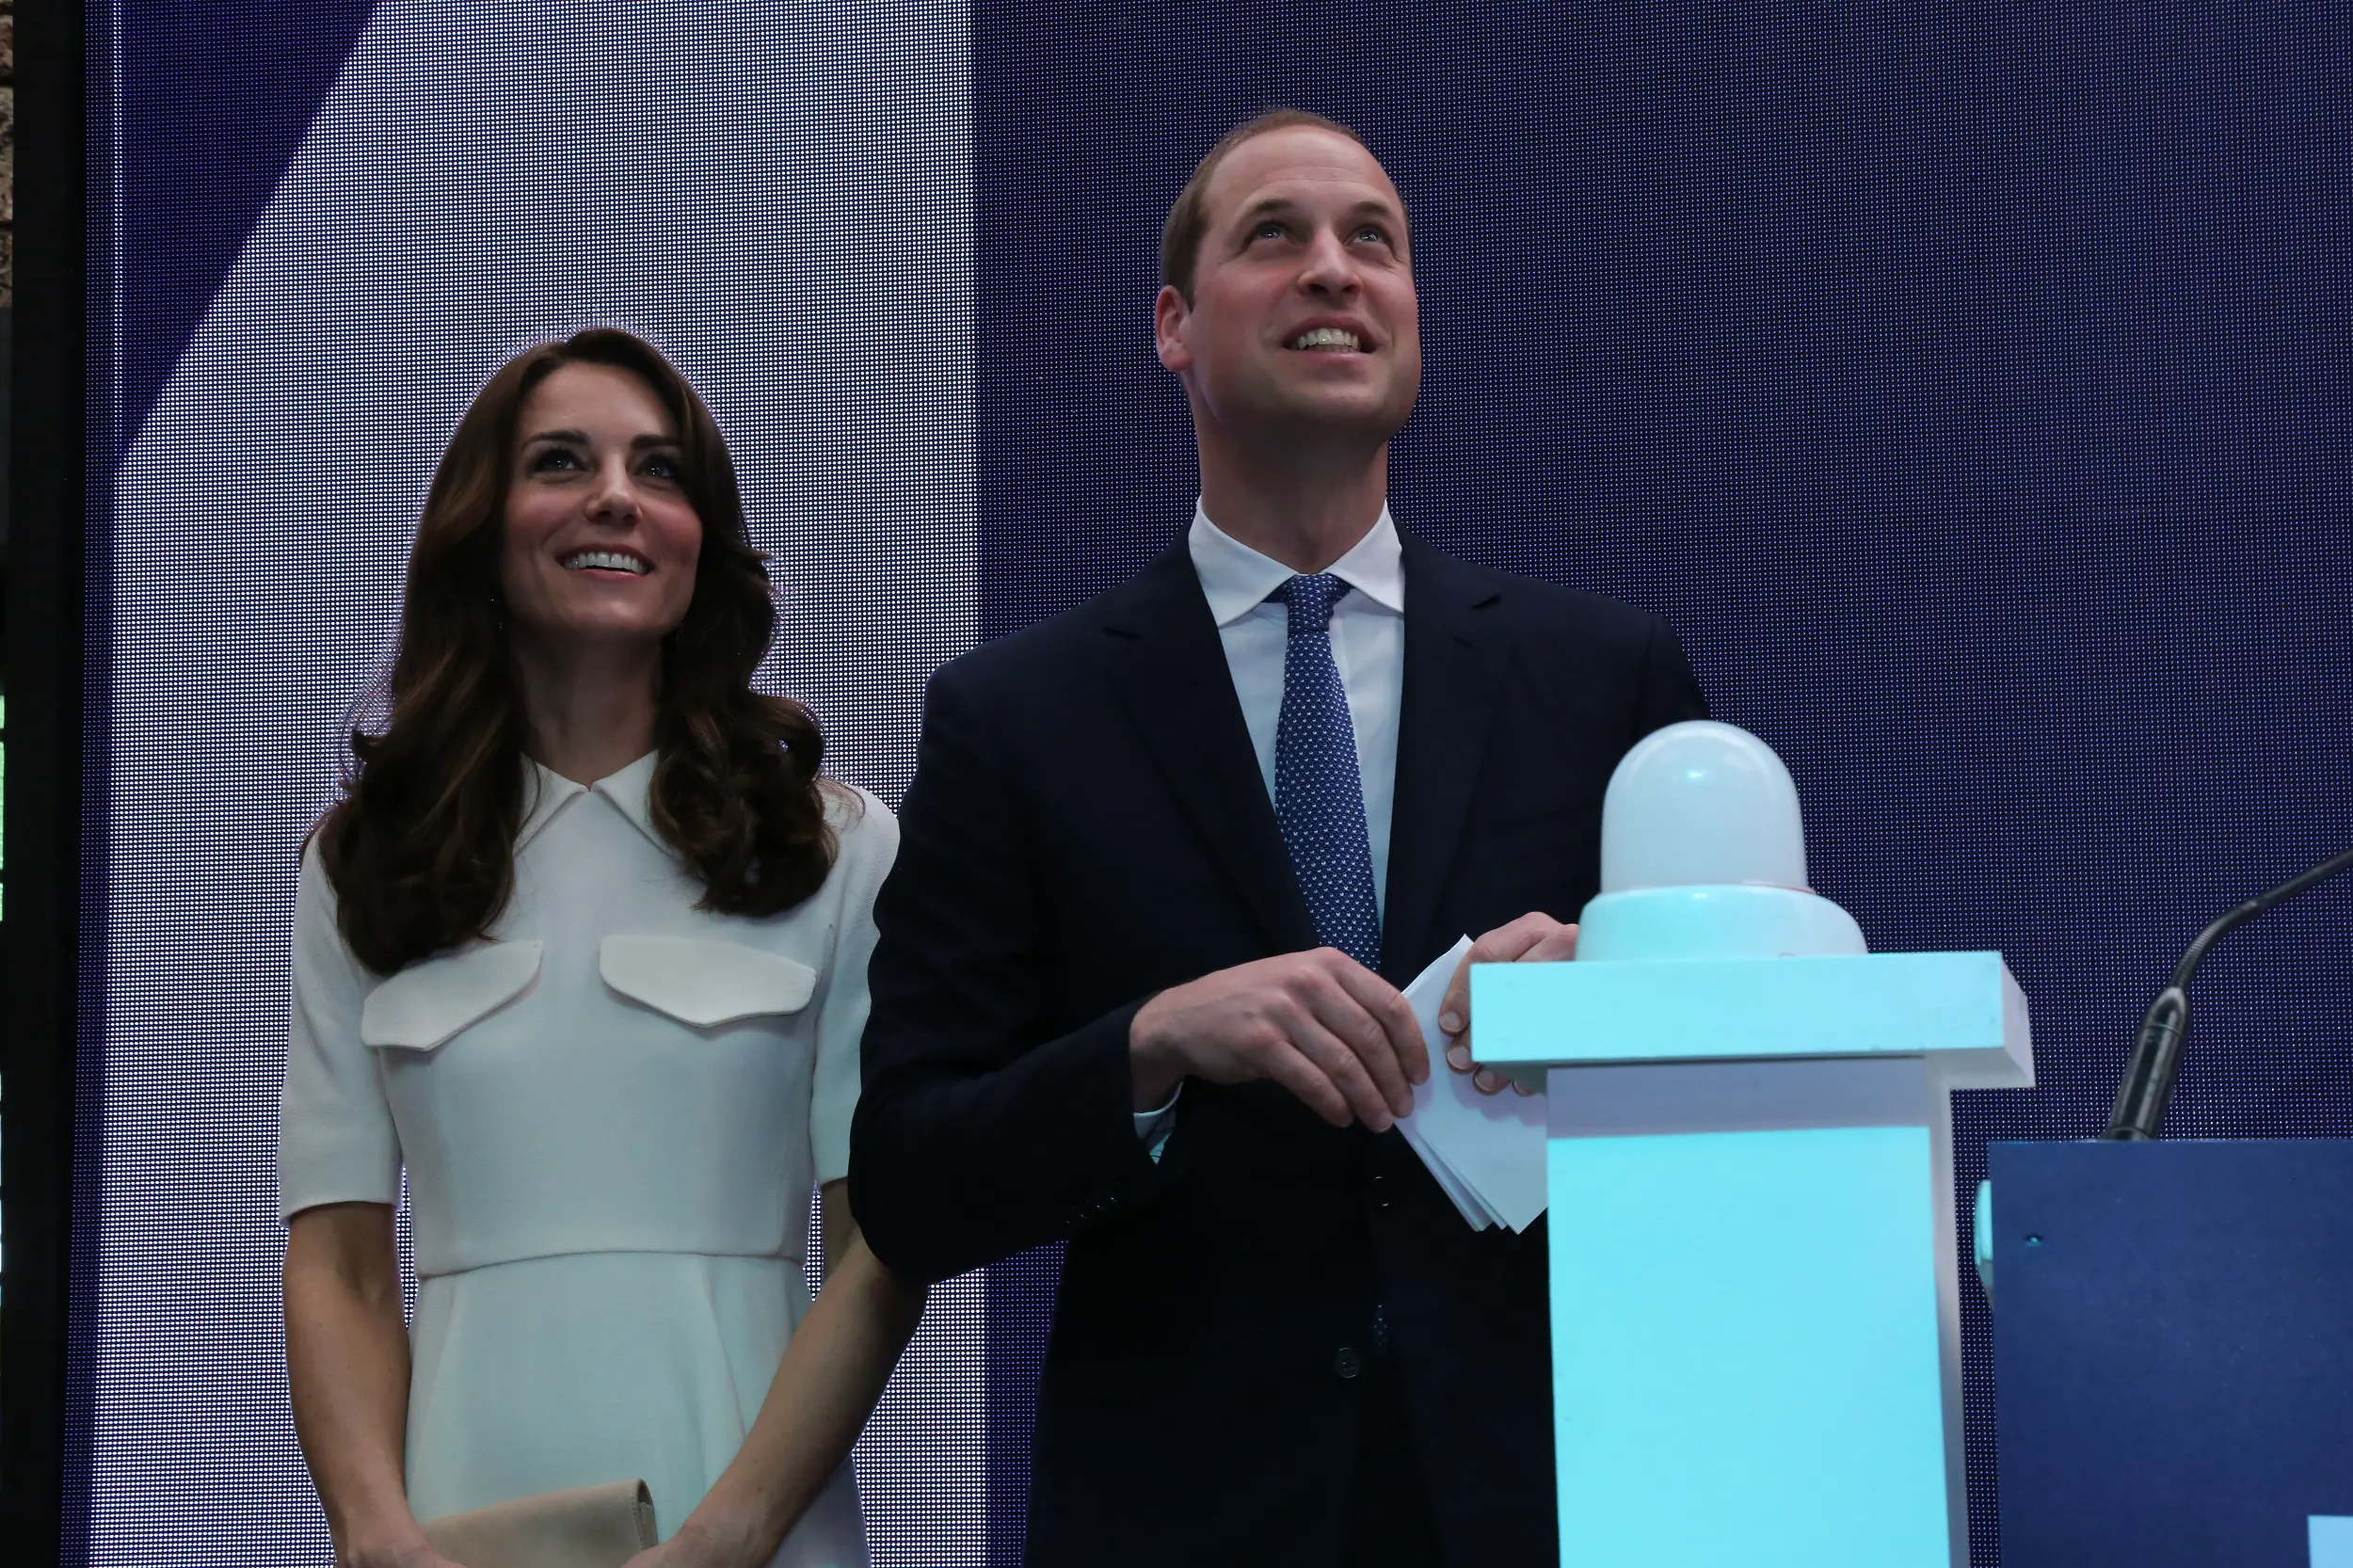 Being here today, it is clear that India is leading the way in so many areas of innovation and technology - Prince William